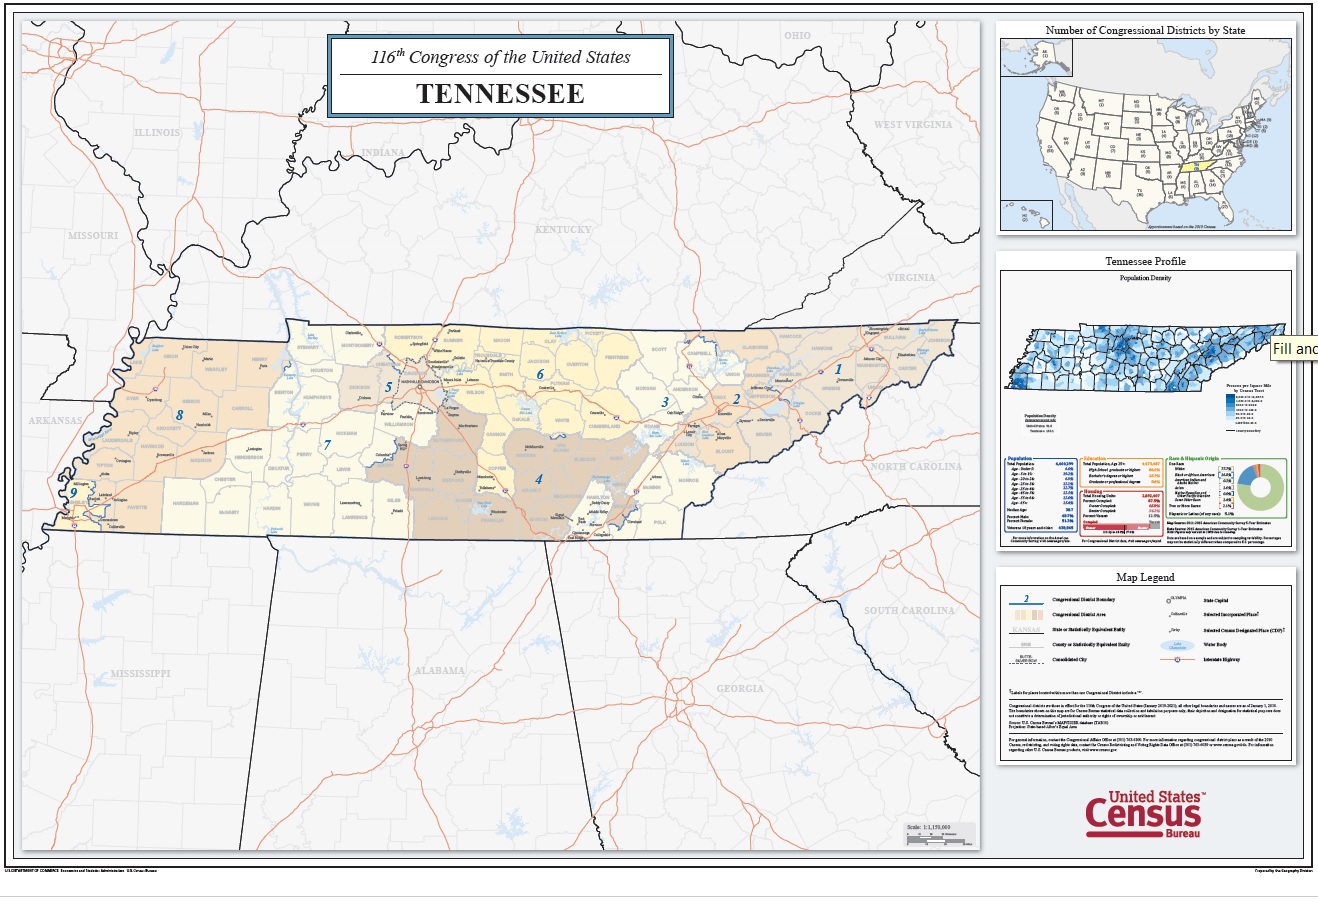 state-redistricting-information-for-tennessee